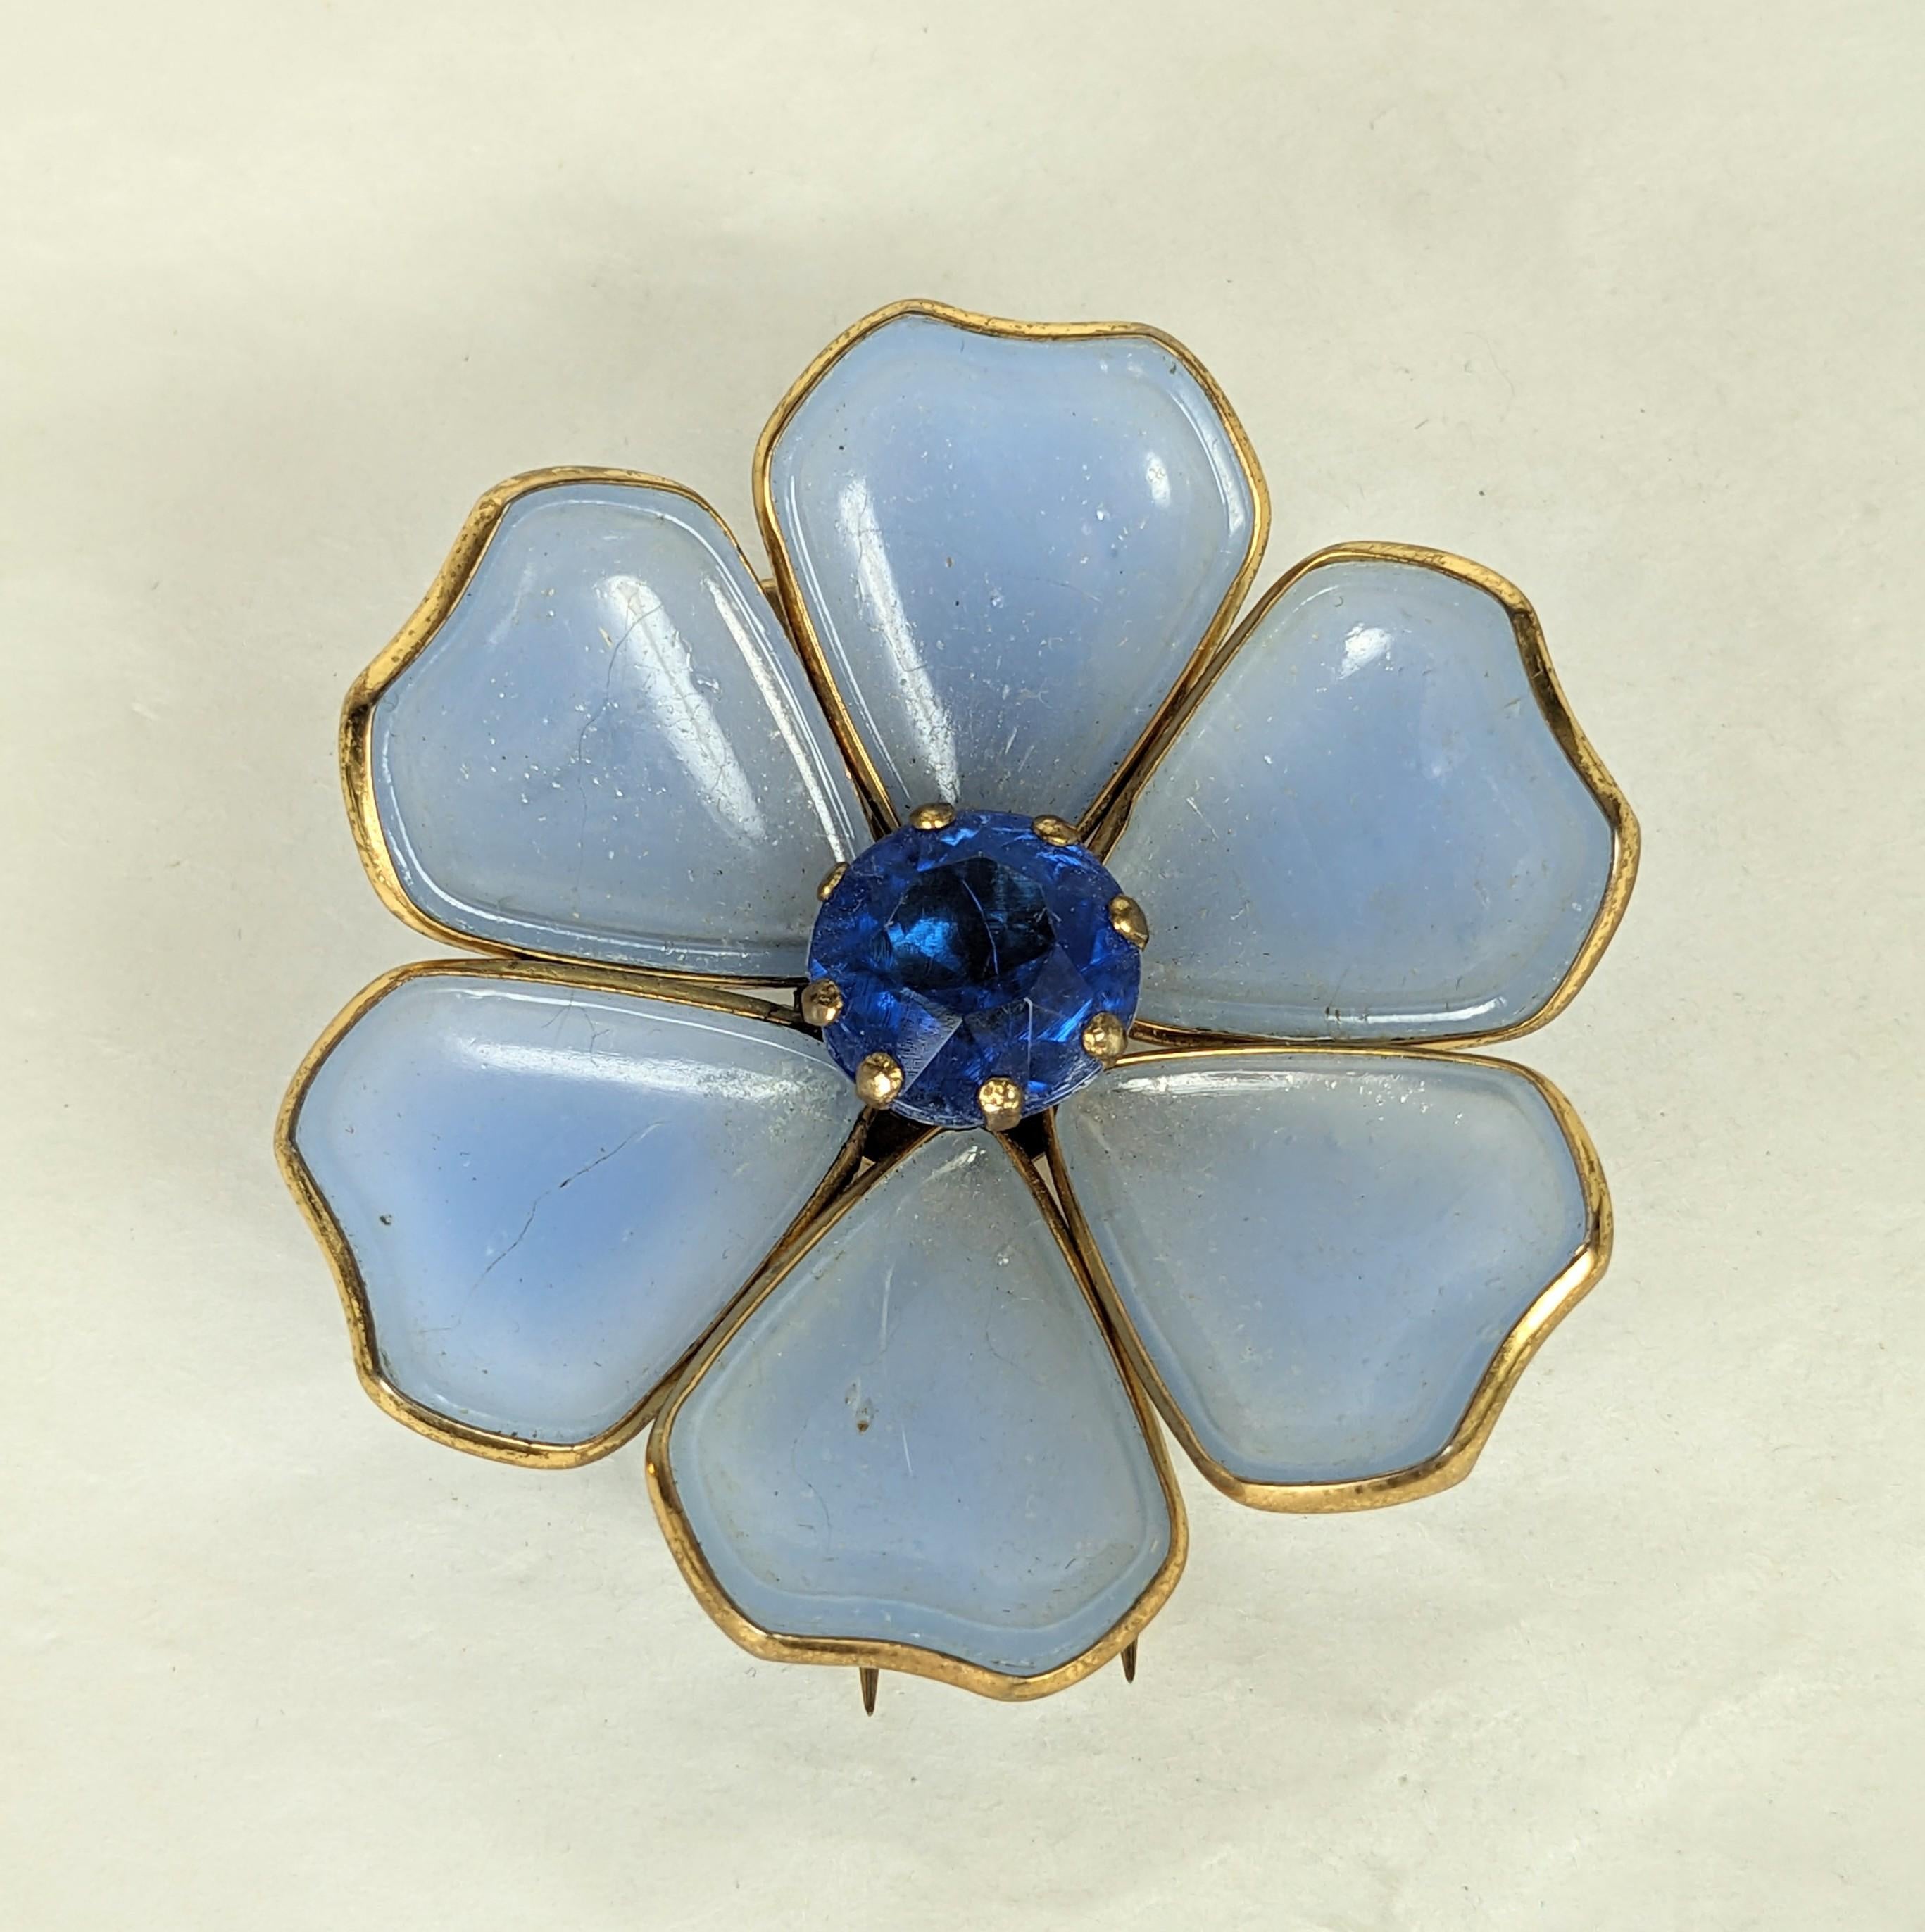 Art Deco Gripoix Style Flower Clip from the 1930's. Pale chalcedony glass are bezeled in brass with sapphire crystal center with Belperron colorations. 1930's USA. 1.75